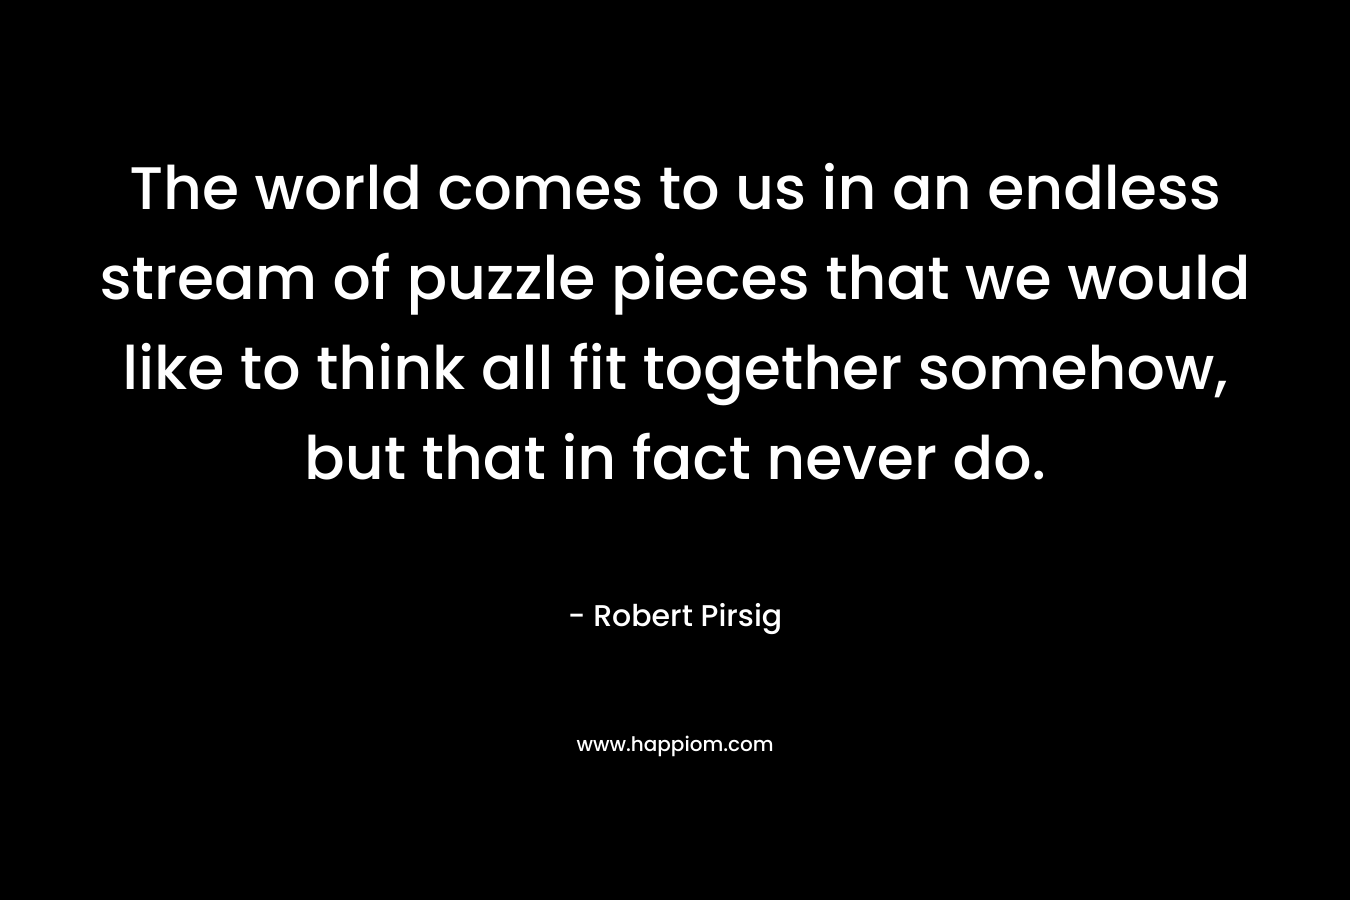 The world comes to us in an endless stream of puzzle pieces that we would like to think all fit together somehow, but that in fact never do.